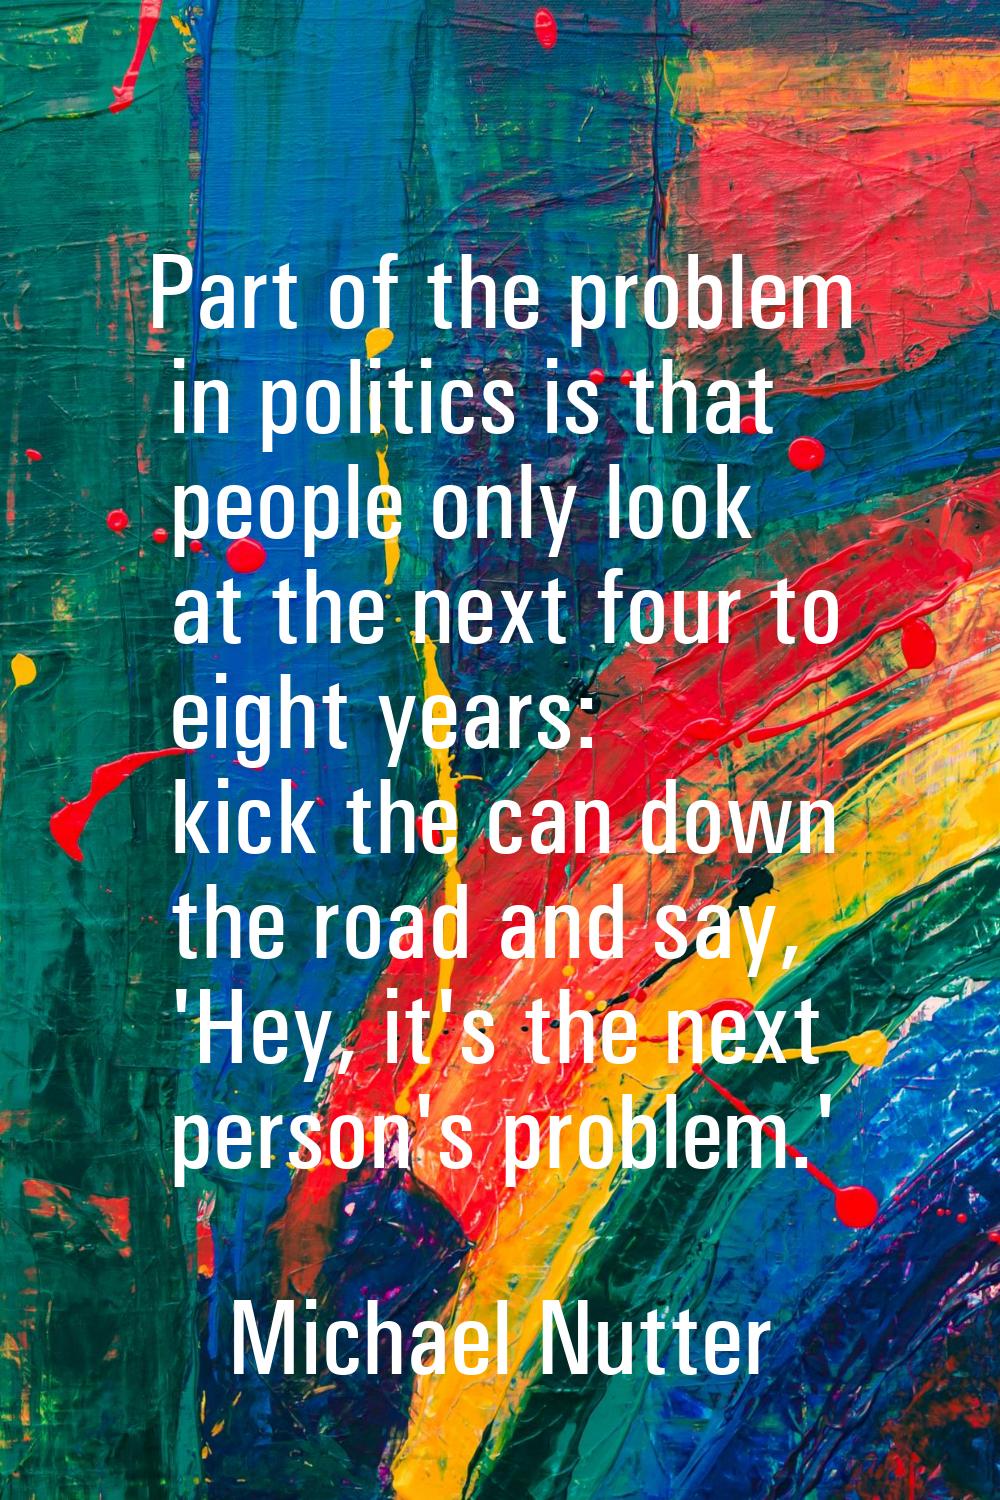 Part of the problem in politics is that people only look at the next four to eight years: kick the 